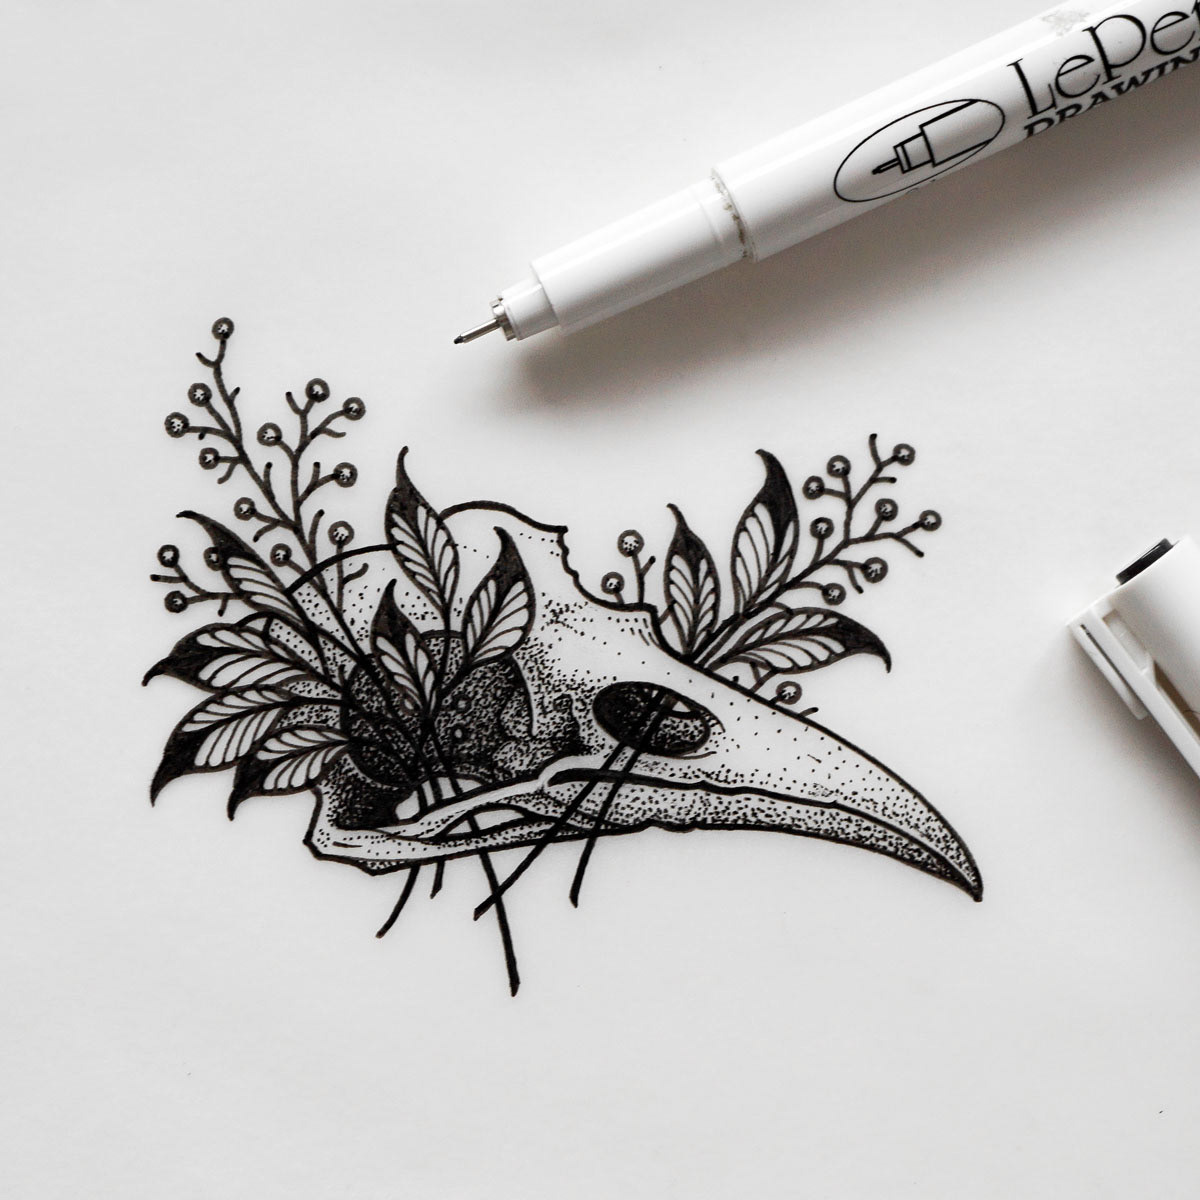 A simple ink drawing makes the ordinary look so cool! - Yvonne Morell